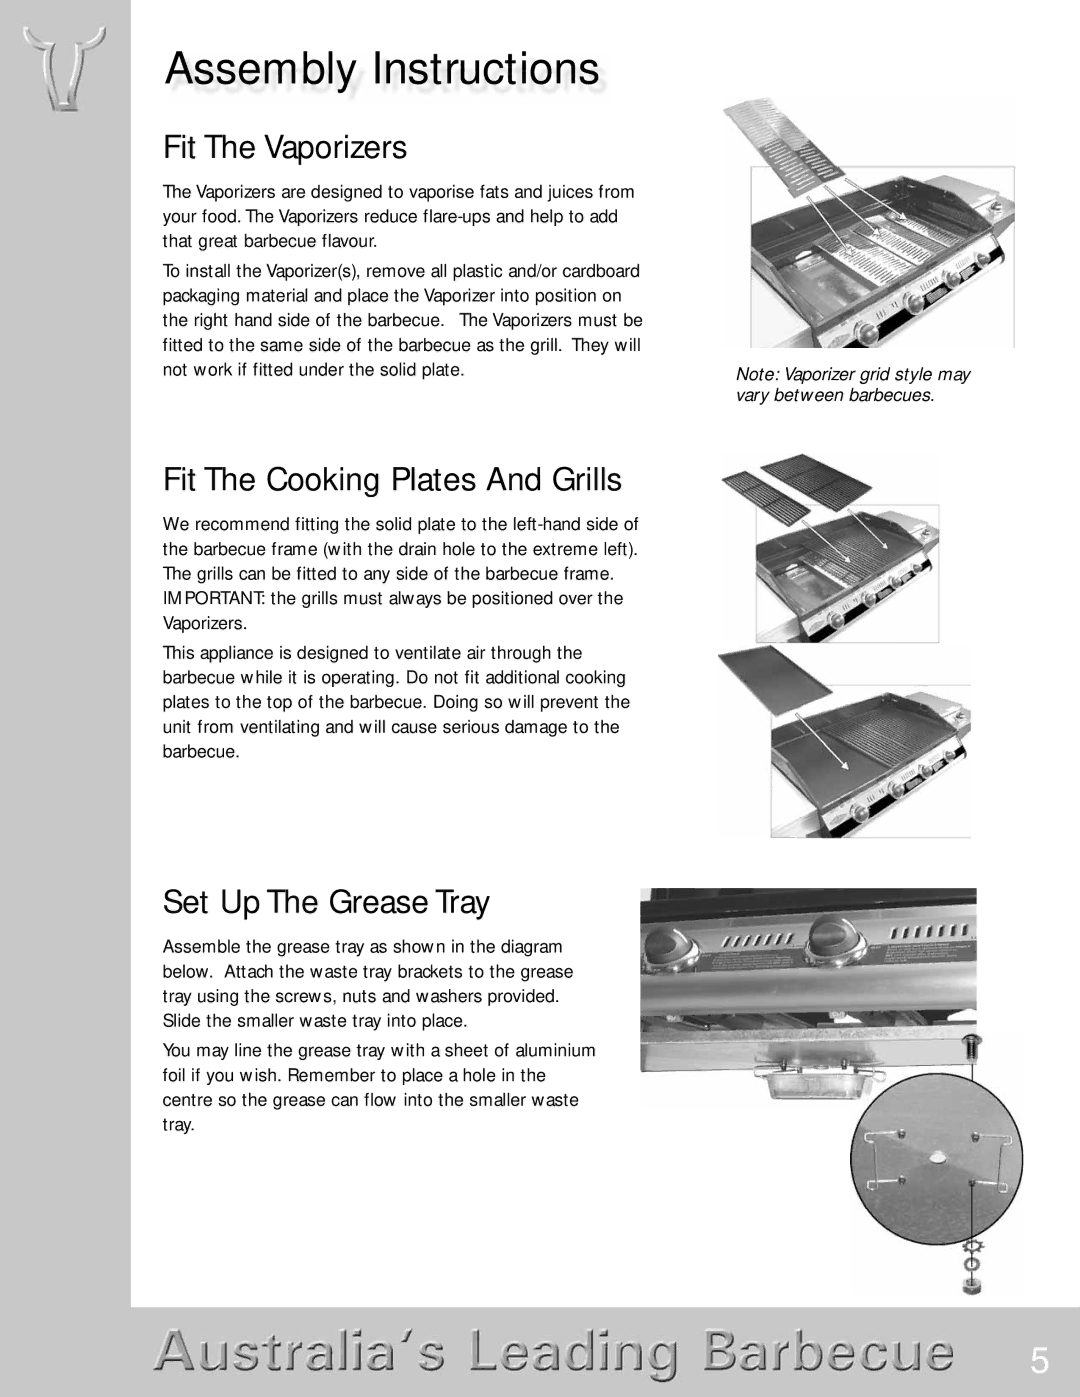 BeefEater Discovery Series manual Fit The Vaporizers, Fit The Cooking Plates And Grills, Set Up The Grease Tray 